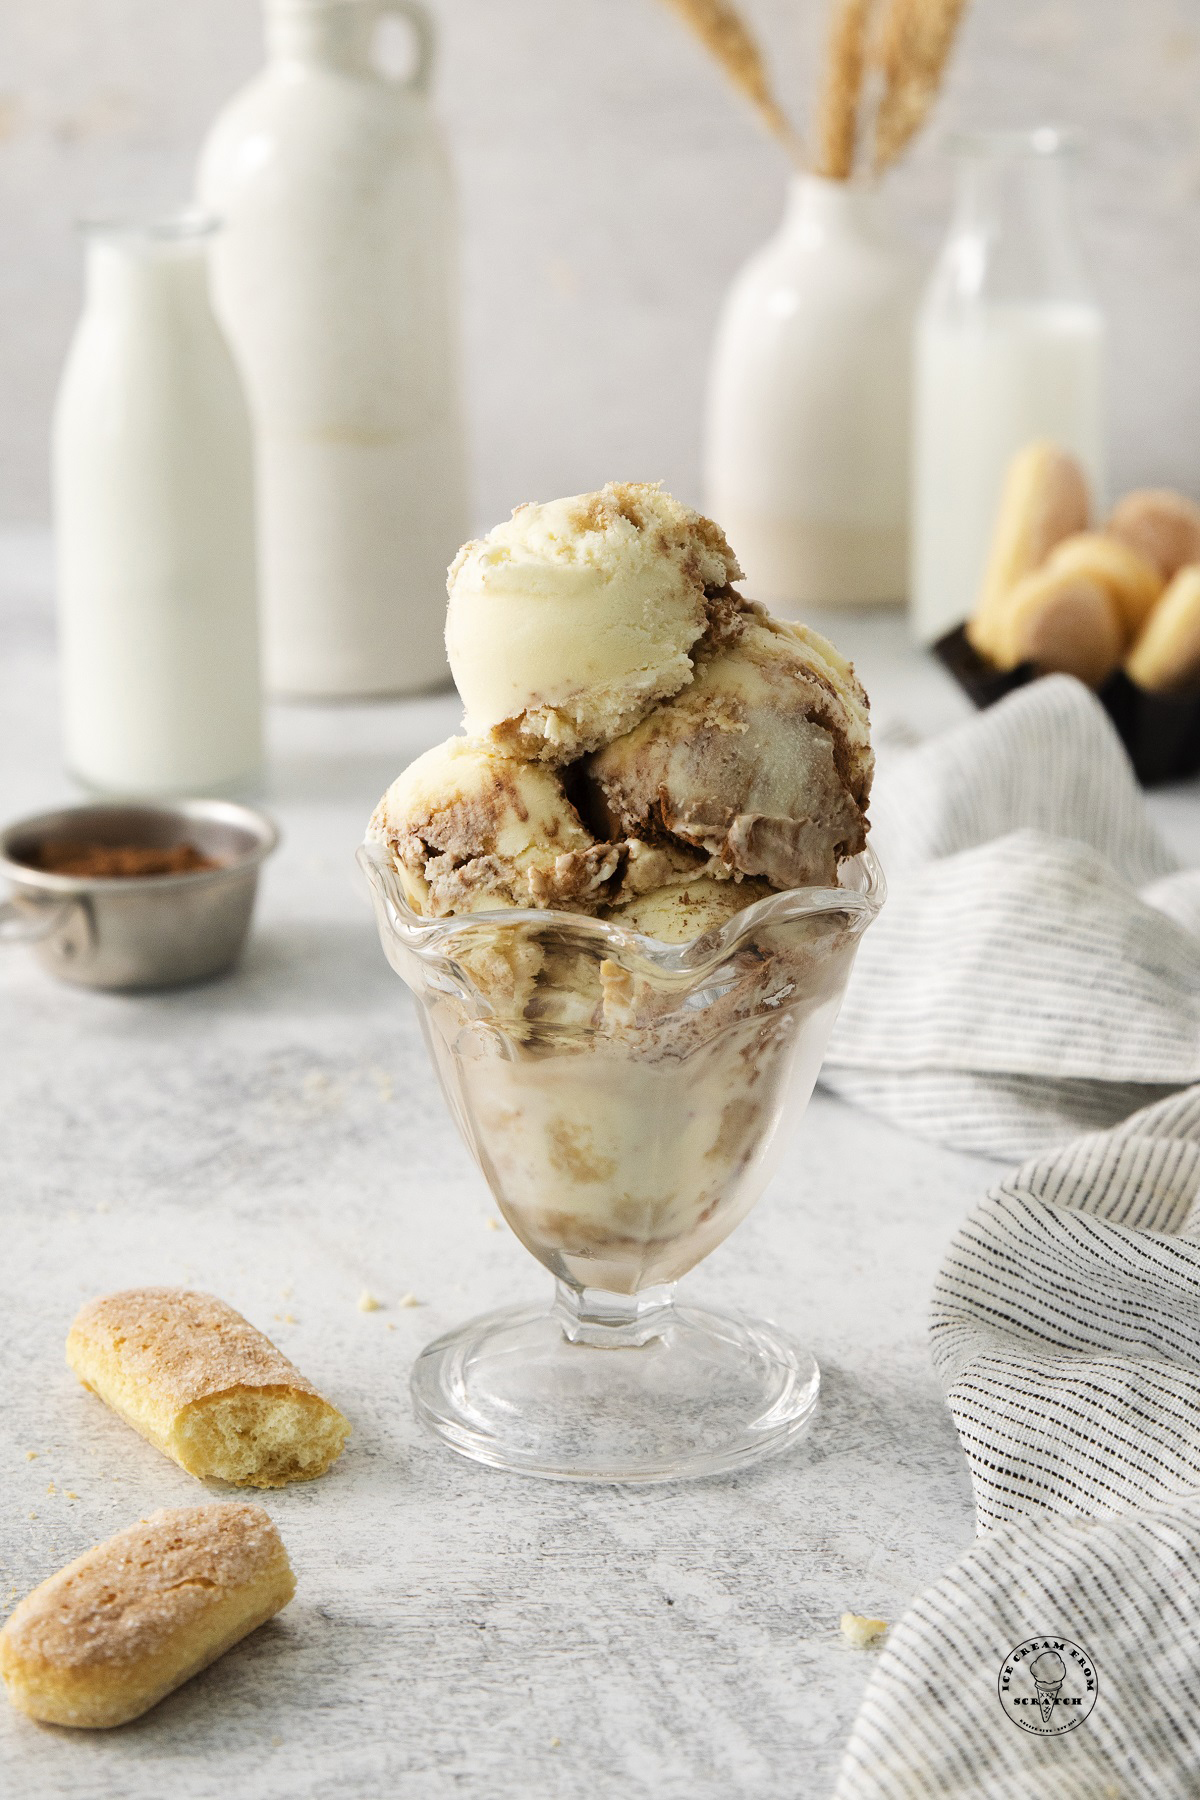 a footed ice cream dish holding scoops of homemade tiramisu ice cream. In the background are bottles of cream and ladyfingers